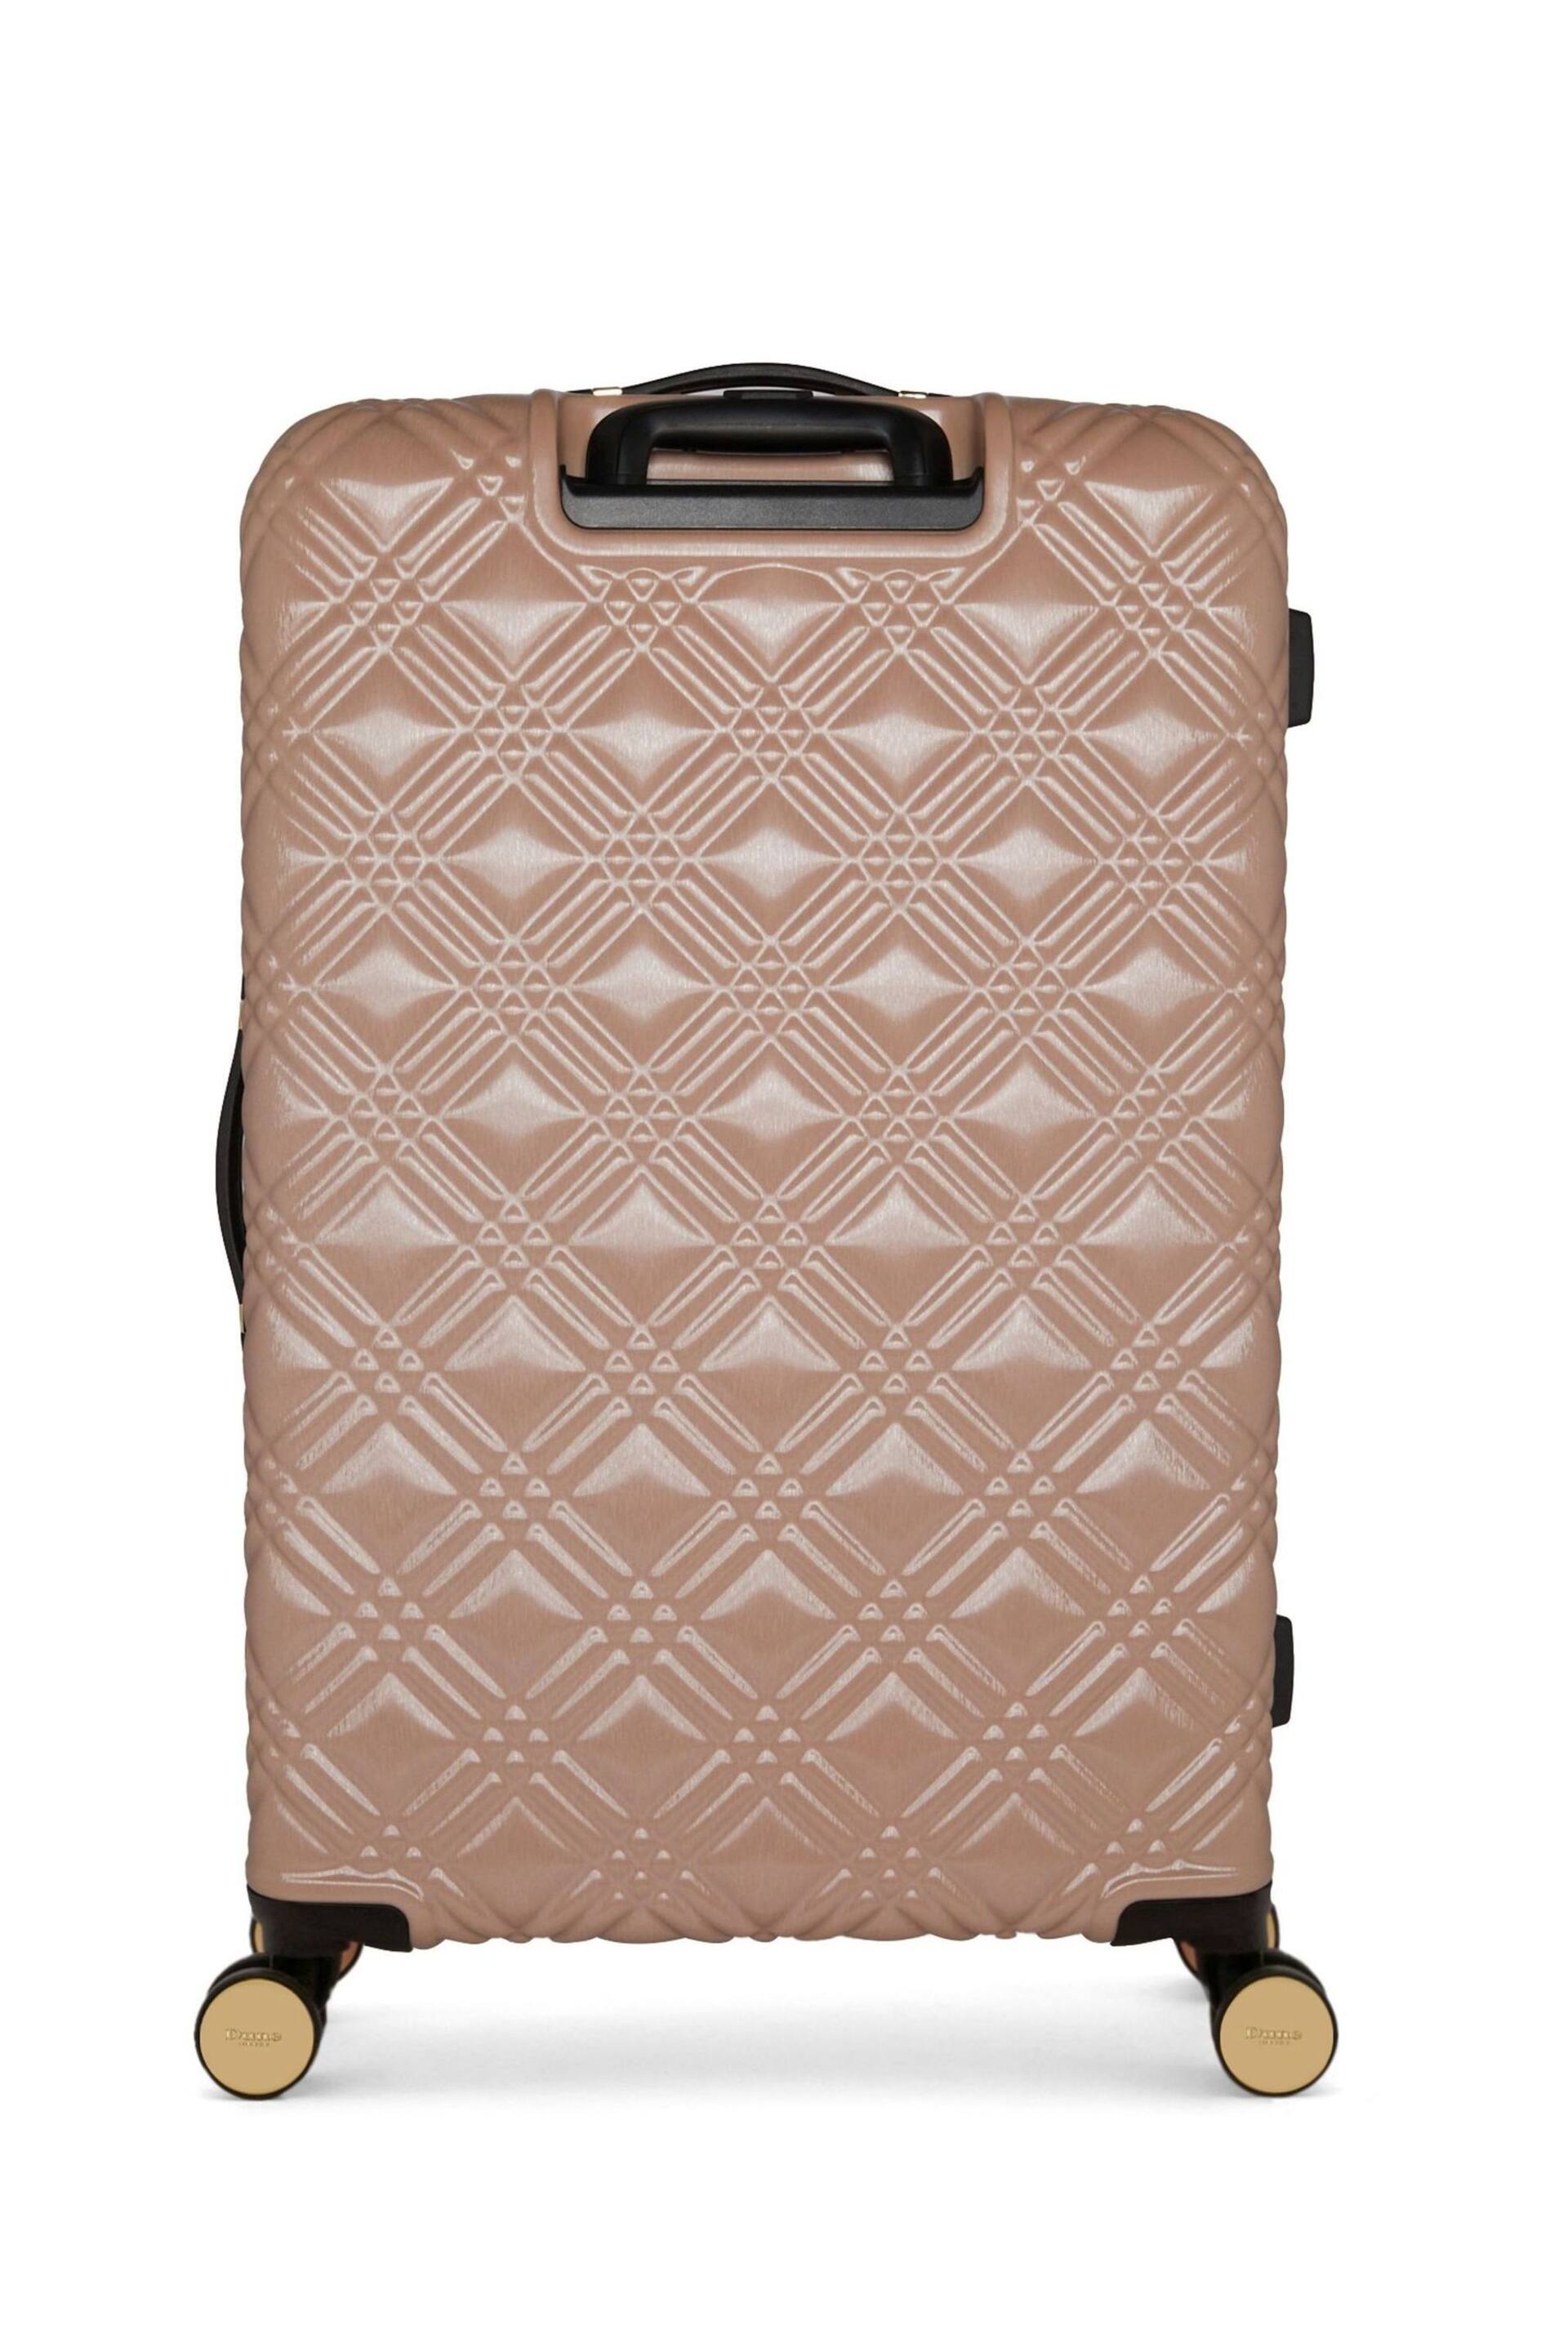 Dune London Pink Large Orchester 77cm Suitcase - Image 2 of 5